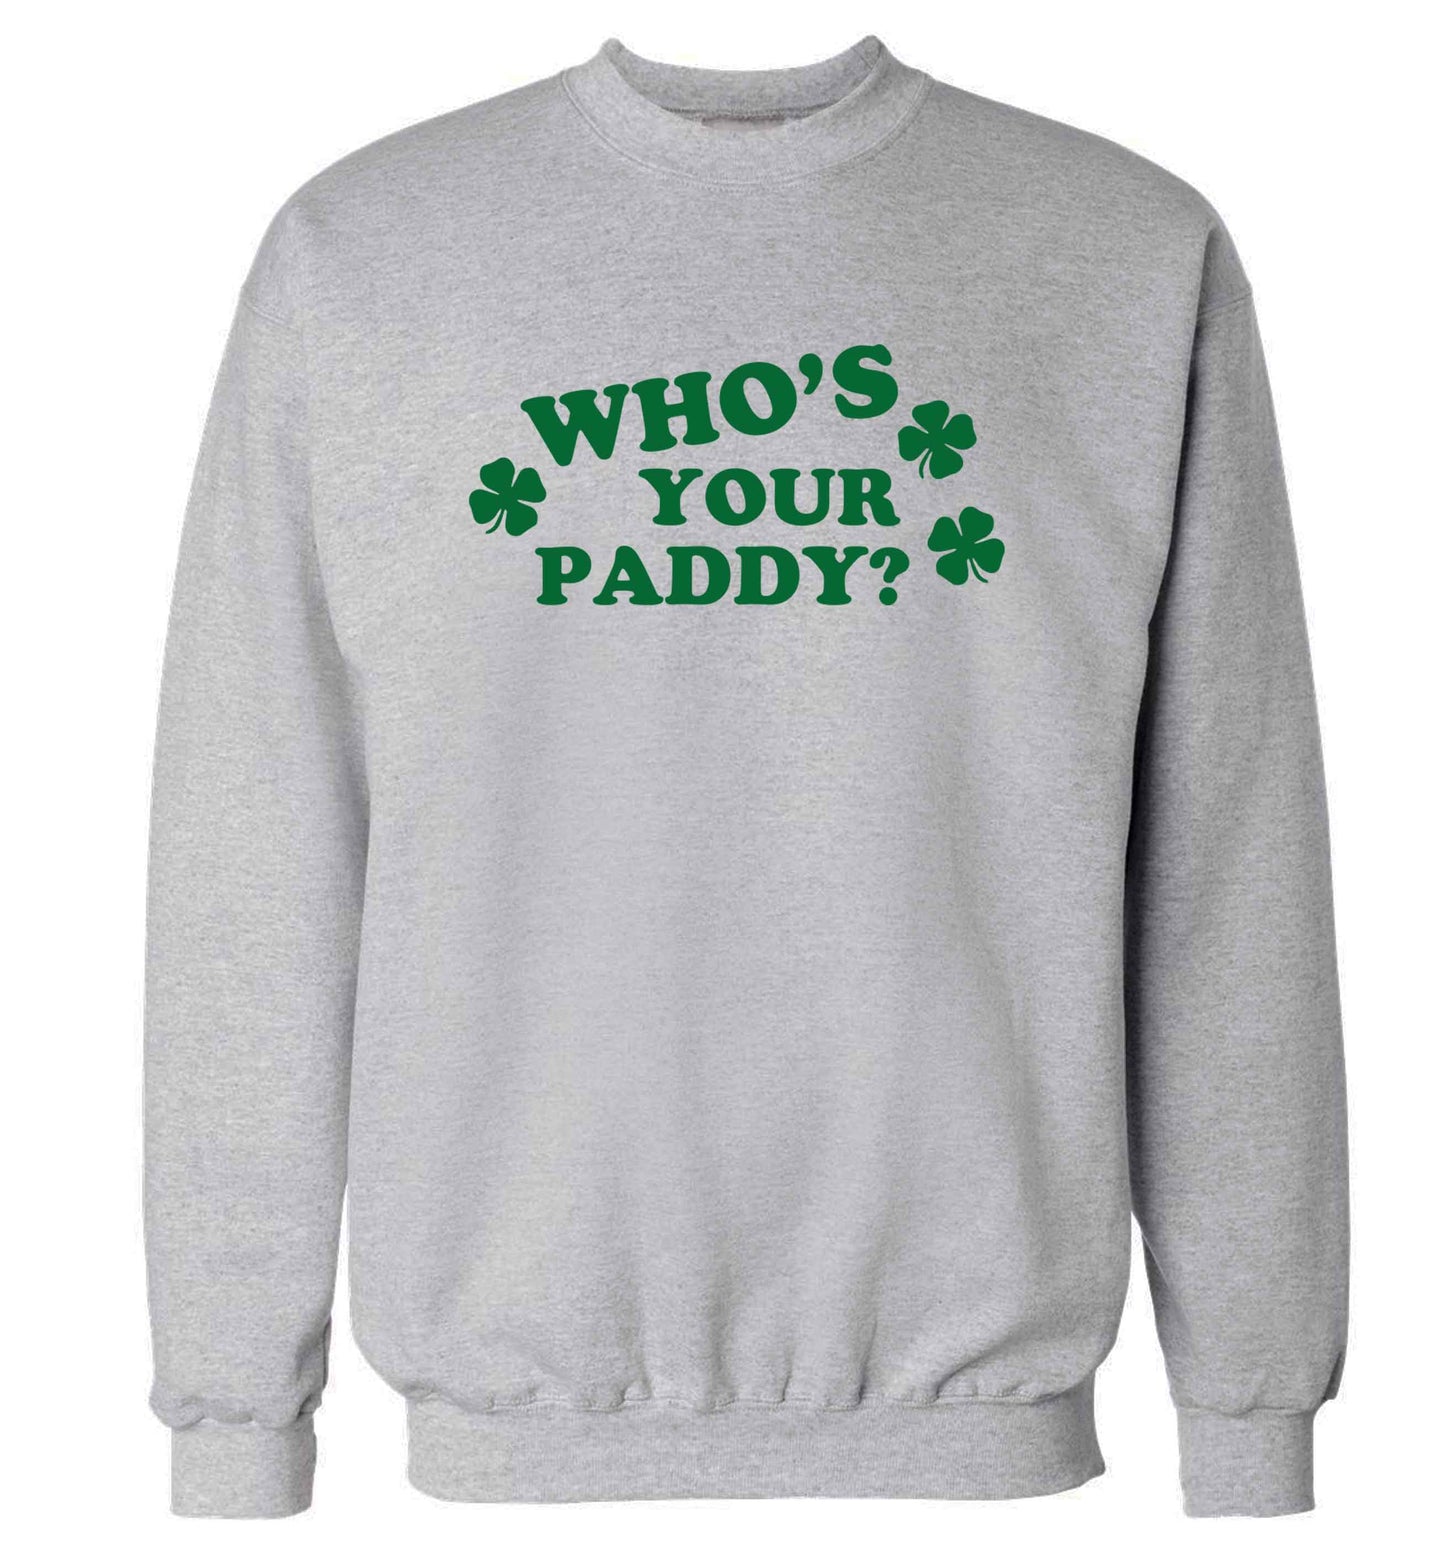 Who's your paddy? adult's unisex grey sweater 2XL